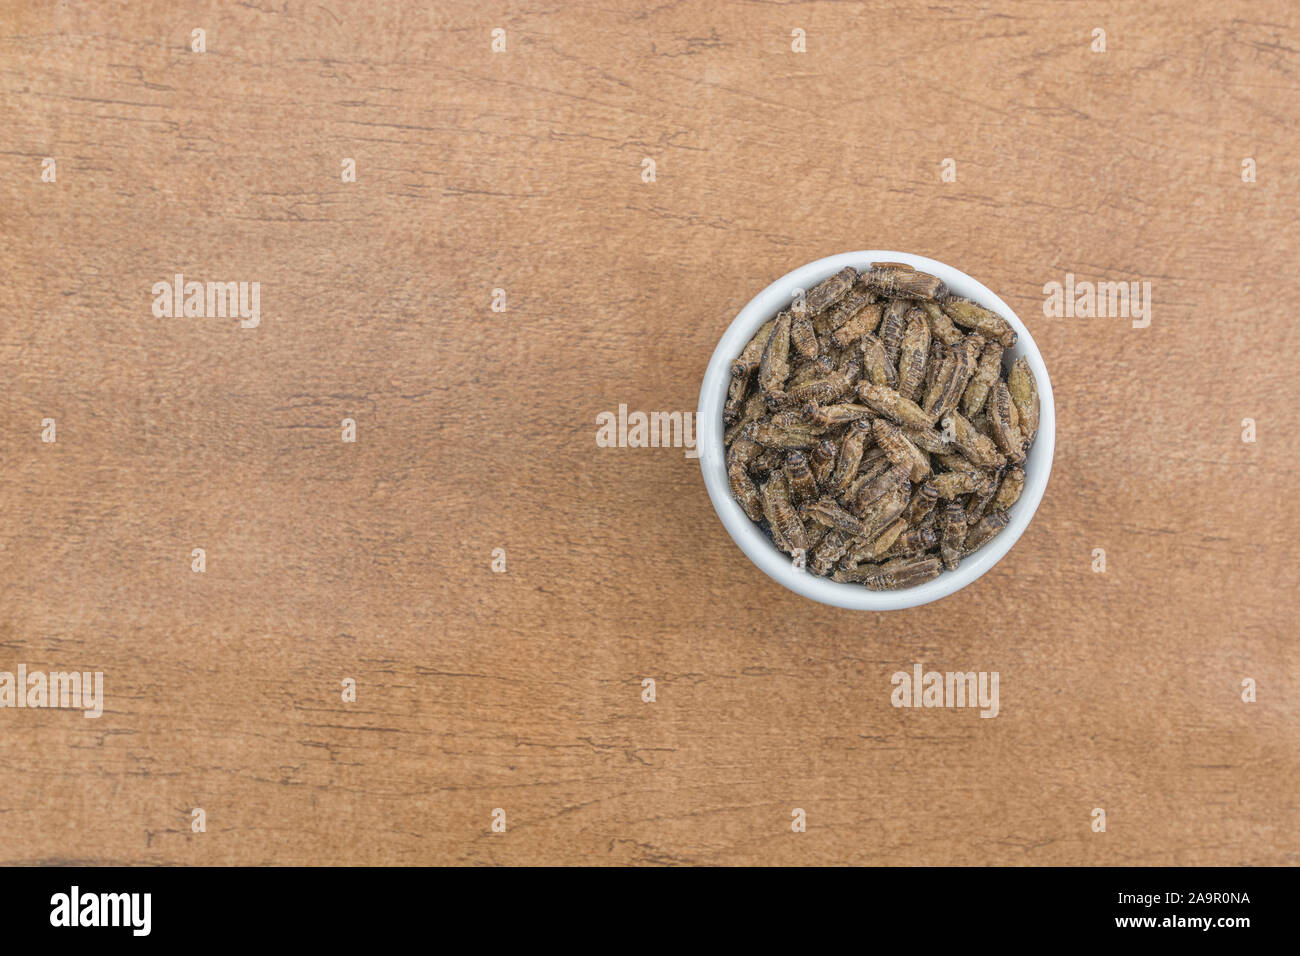 Edible insects - salted Small Crickets possibly Gryllus assimilis - on faux wood b/gd. Entomophagy, edible bugs, insect superfoods, insects as food. Stock Photo